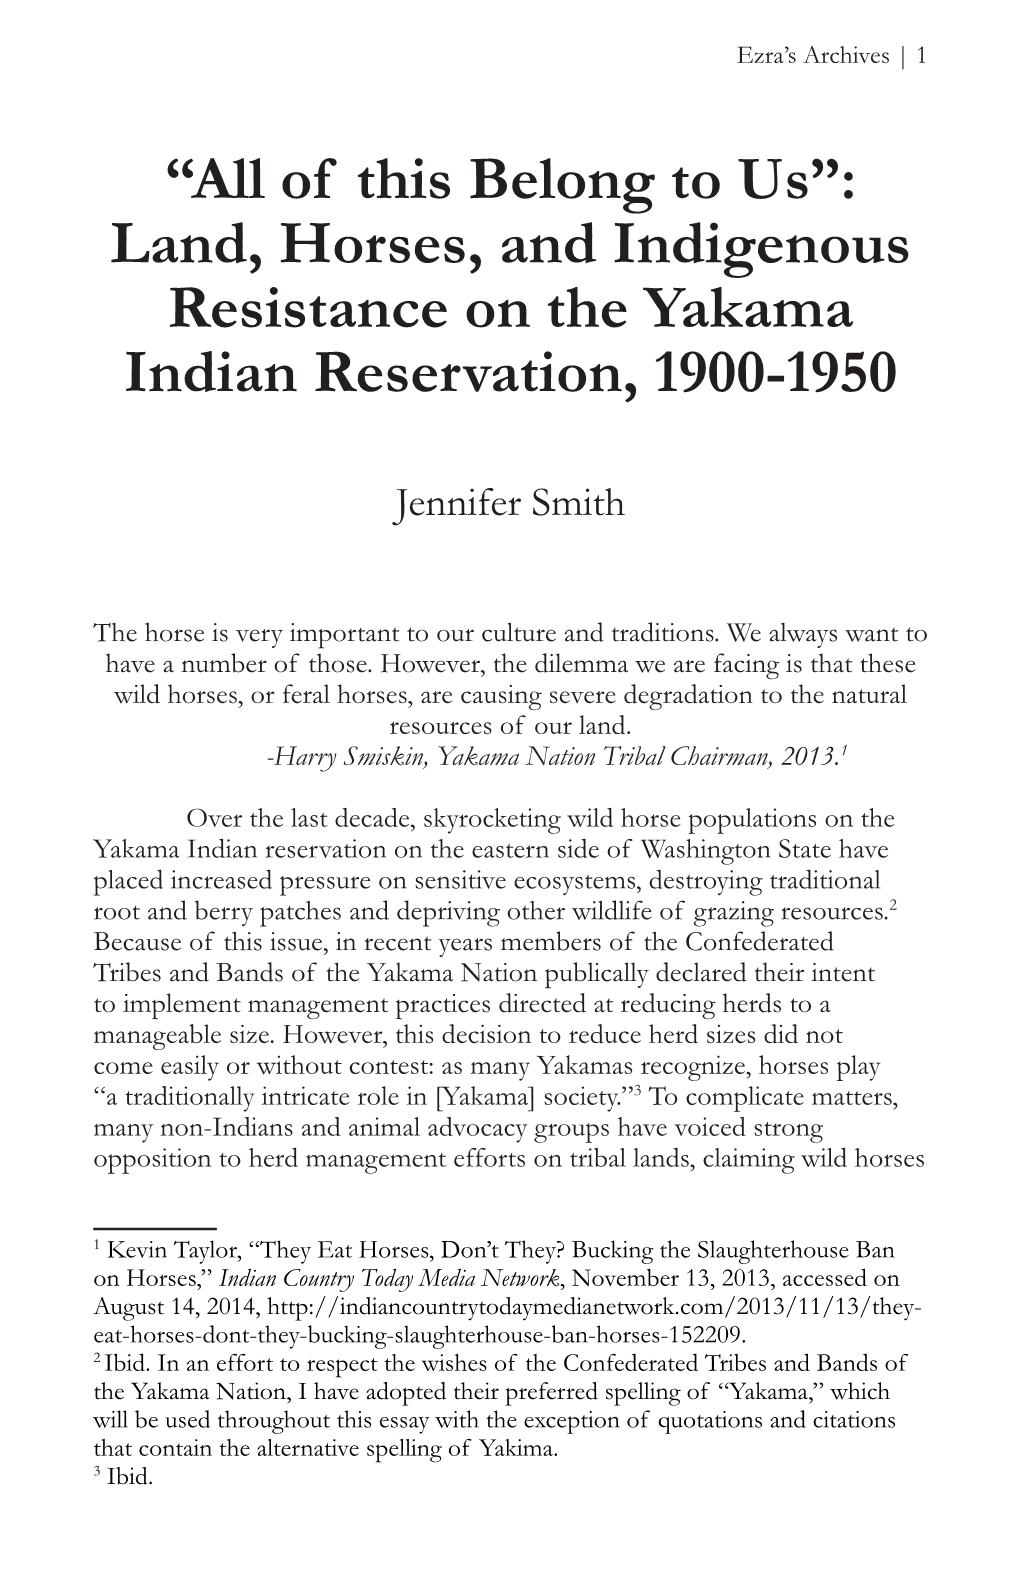 “All of This Belong to Us”: Land, Horses, and Indigenous Resistance on the Yakama Indian Reservation, 1900-1950